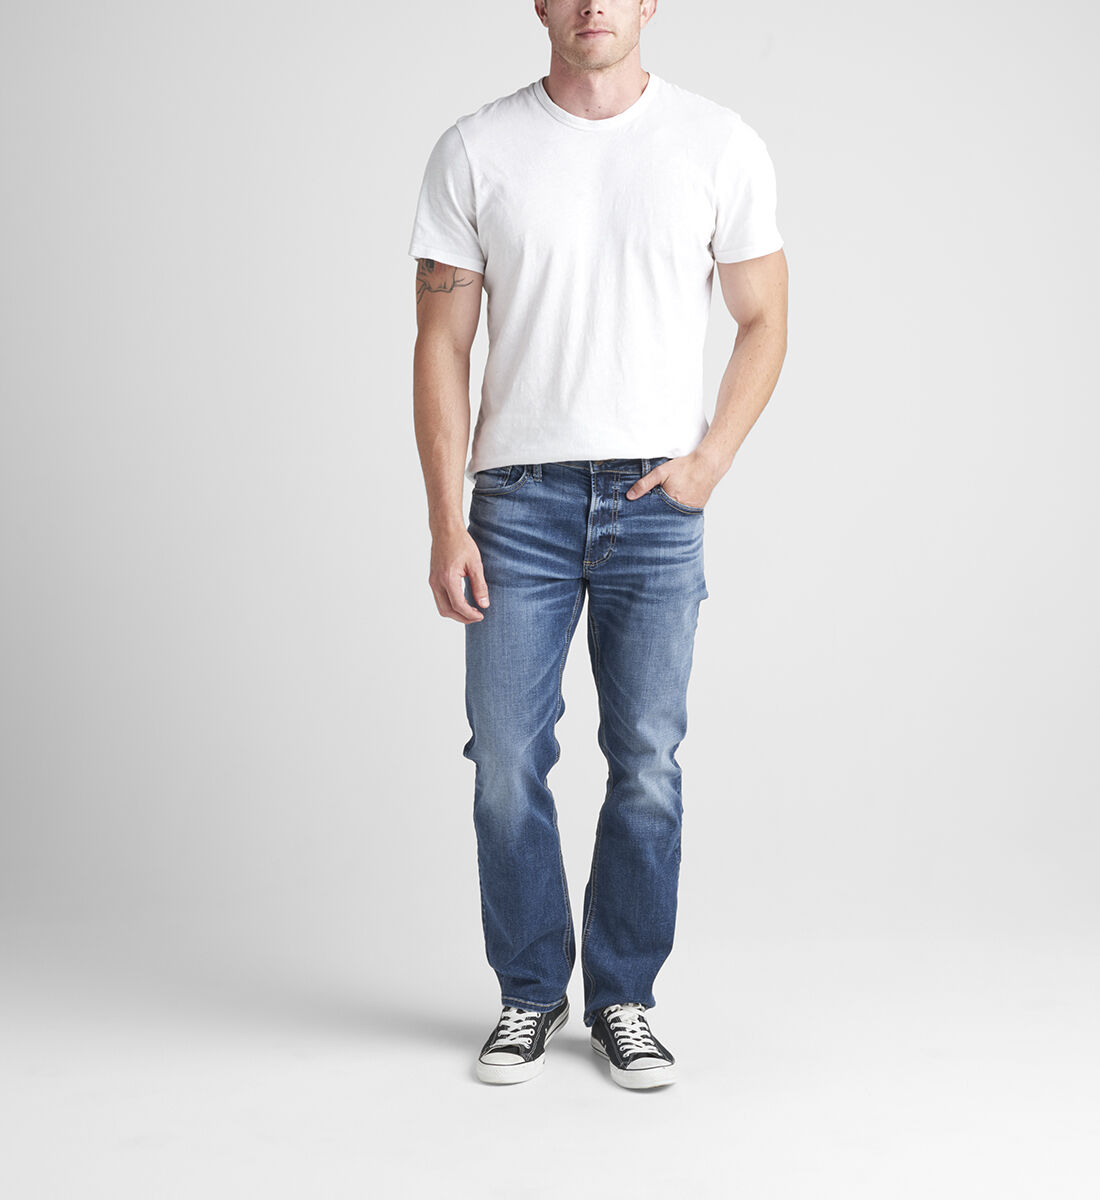 Allan Classic Fit Straight Leg Jeans Front